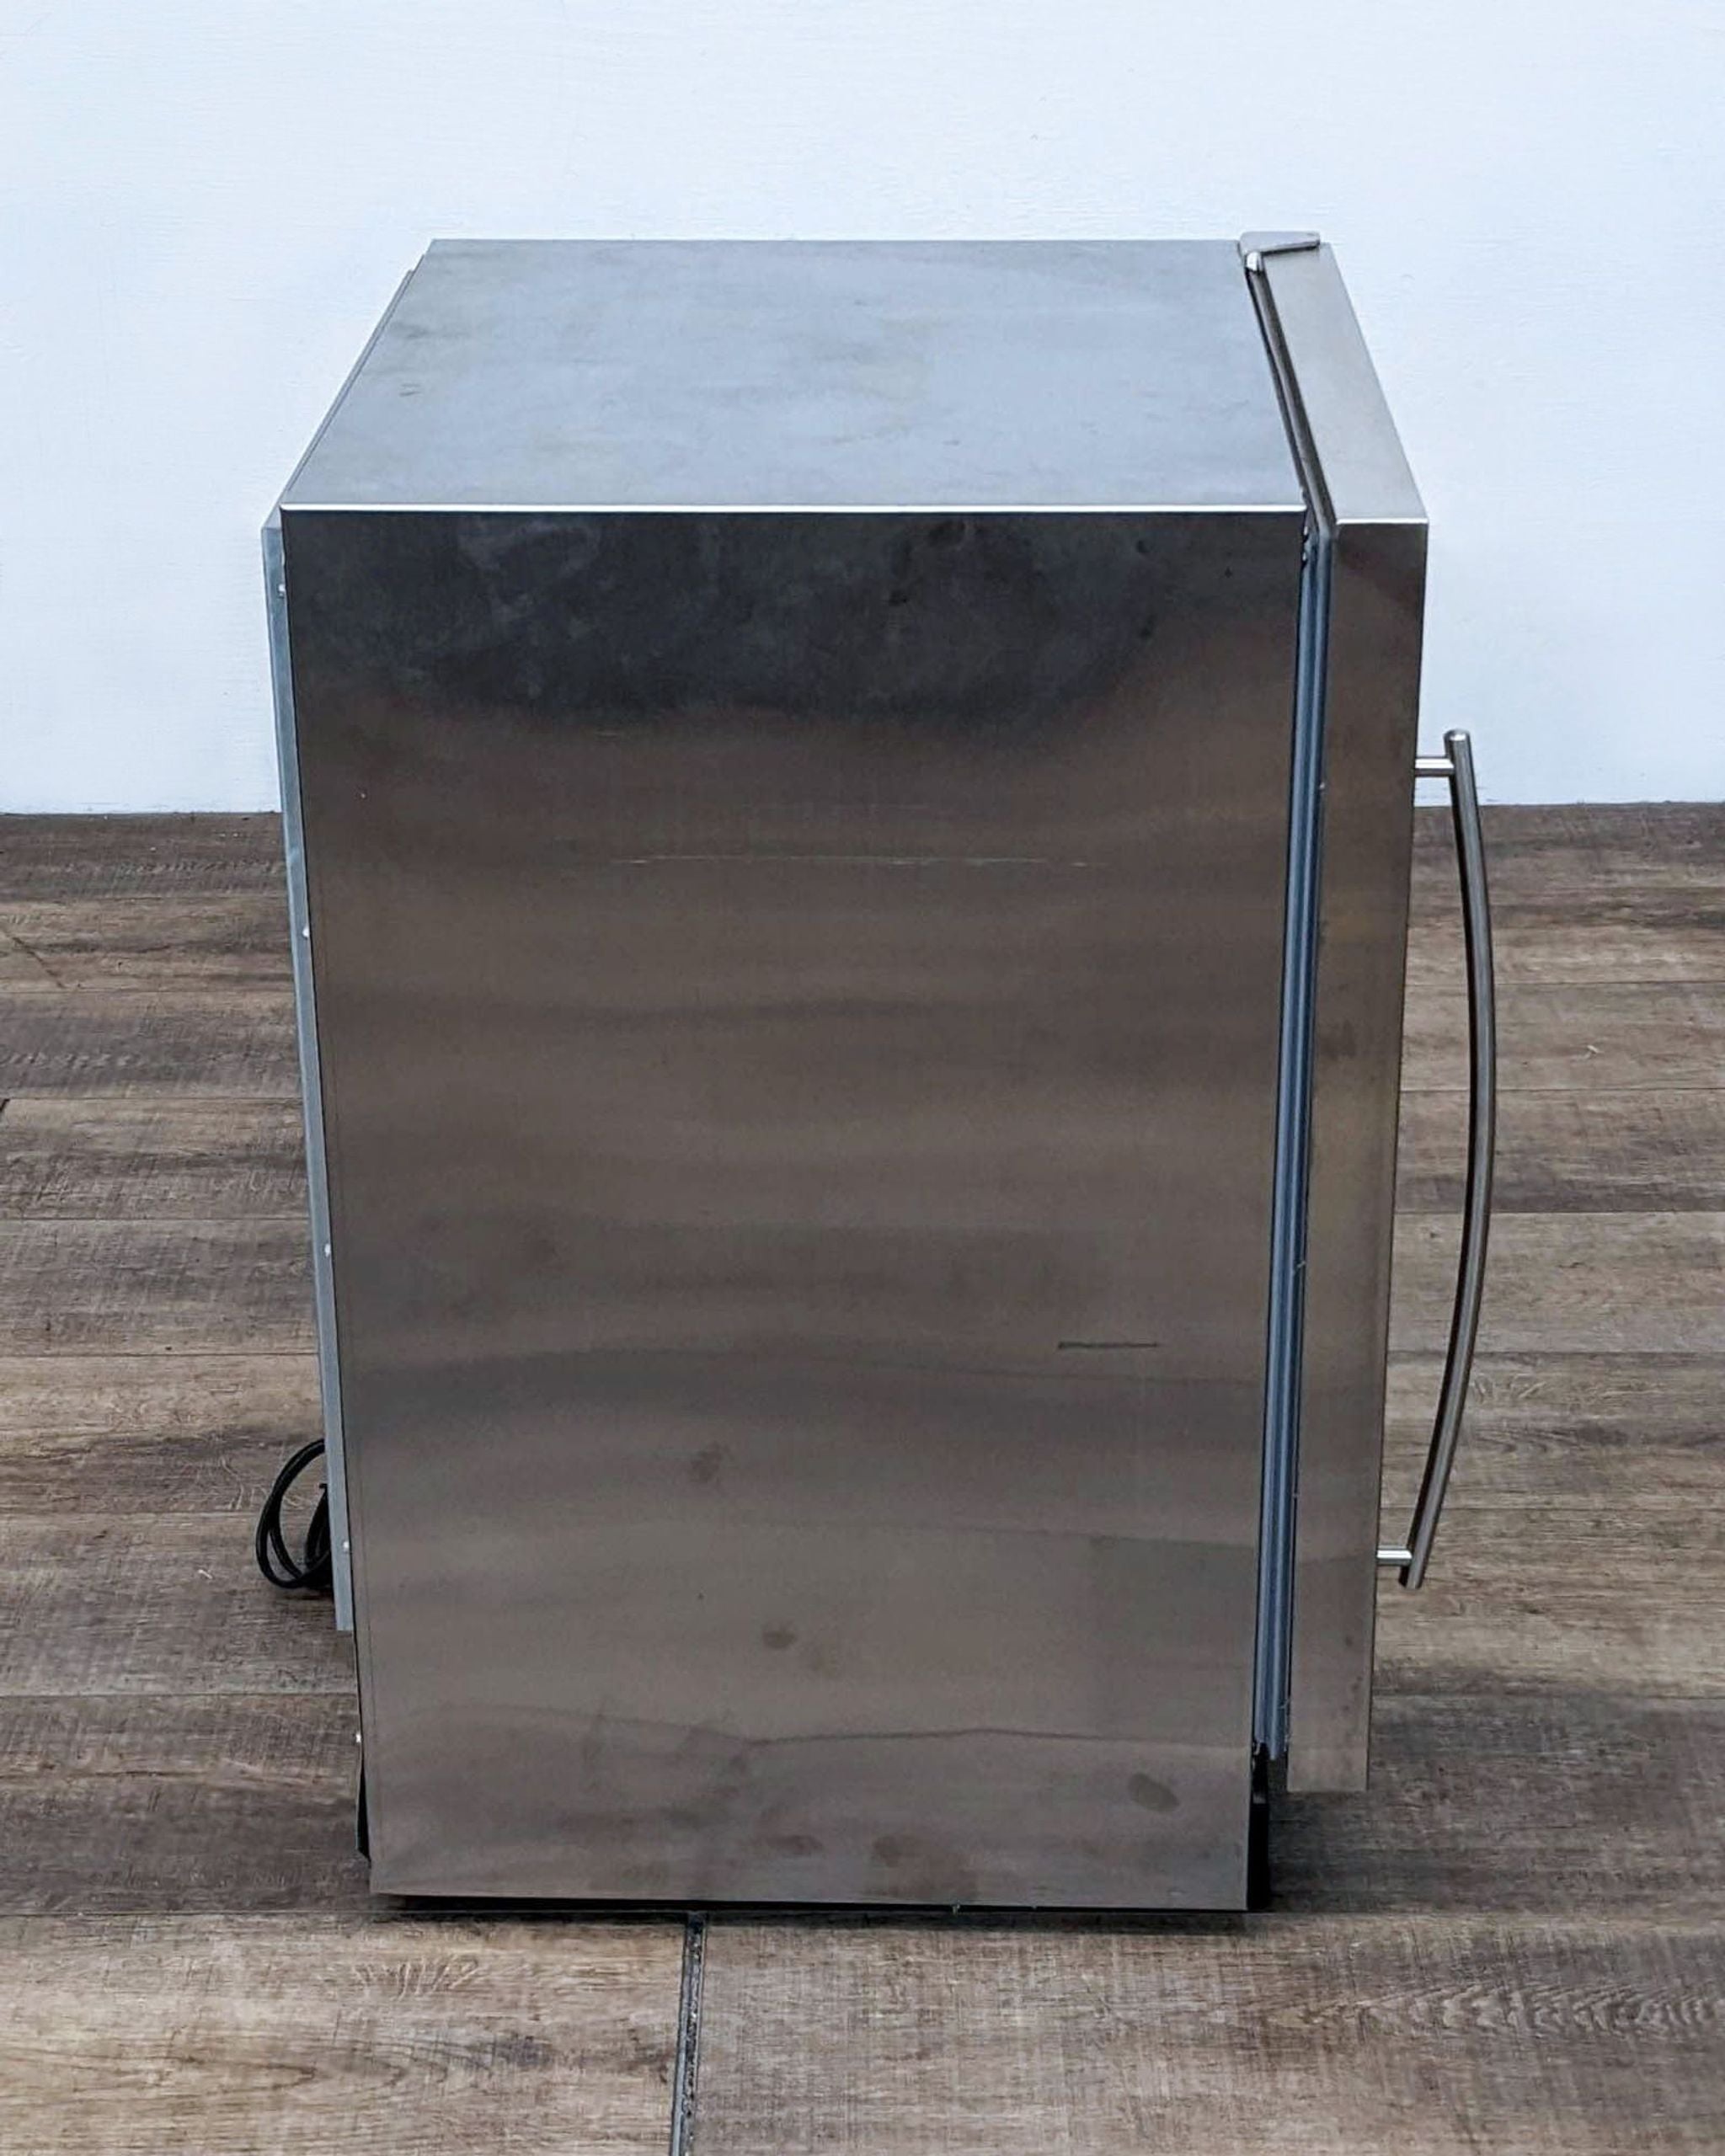 Stainless steel U-Line refrigerator with visible cord, positioned against a white wall on wooden flooring.